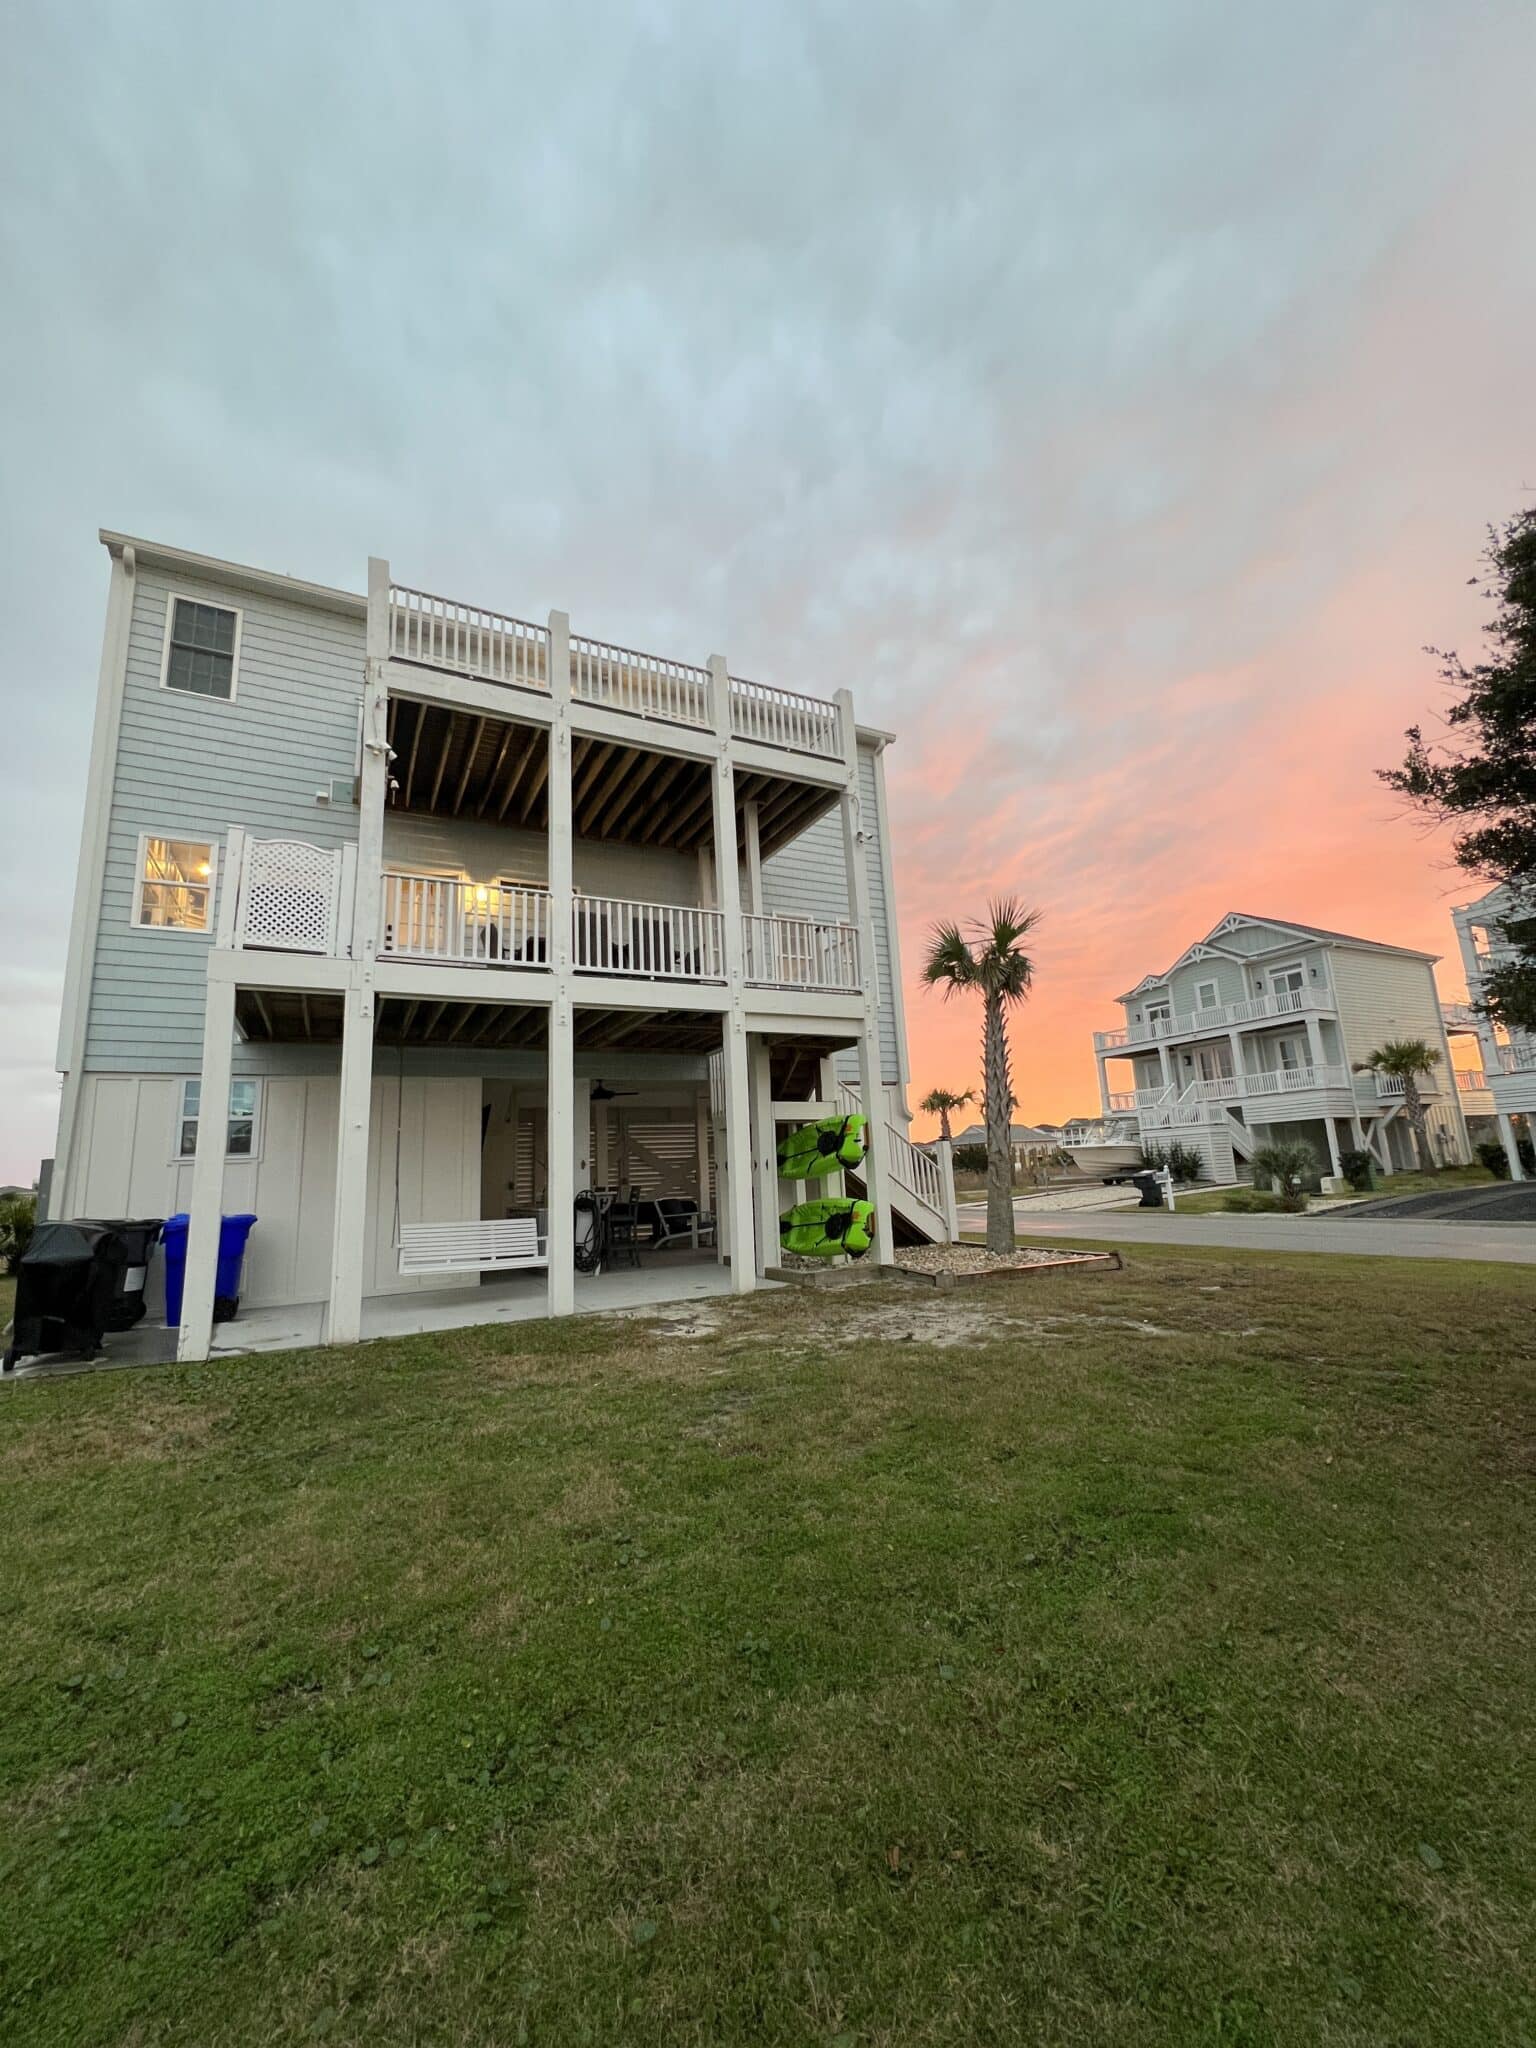 Ocean Isle Beach, NC, Anchors Awey vacation rental, Stilettos and Diapers